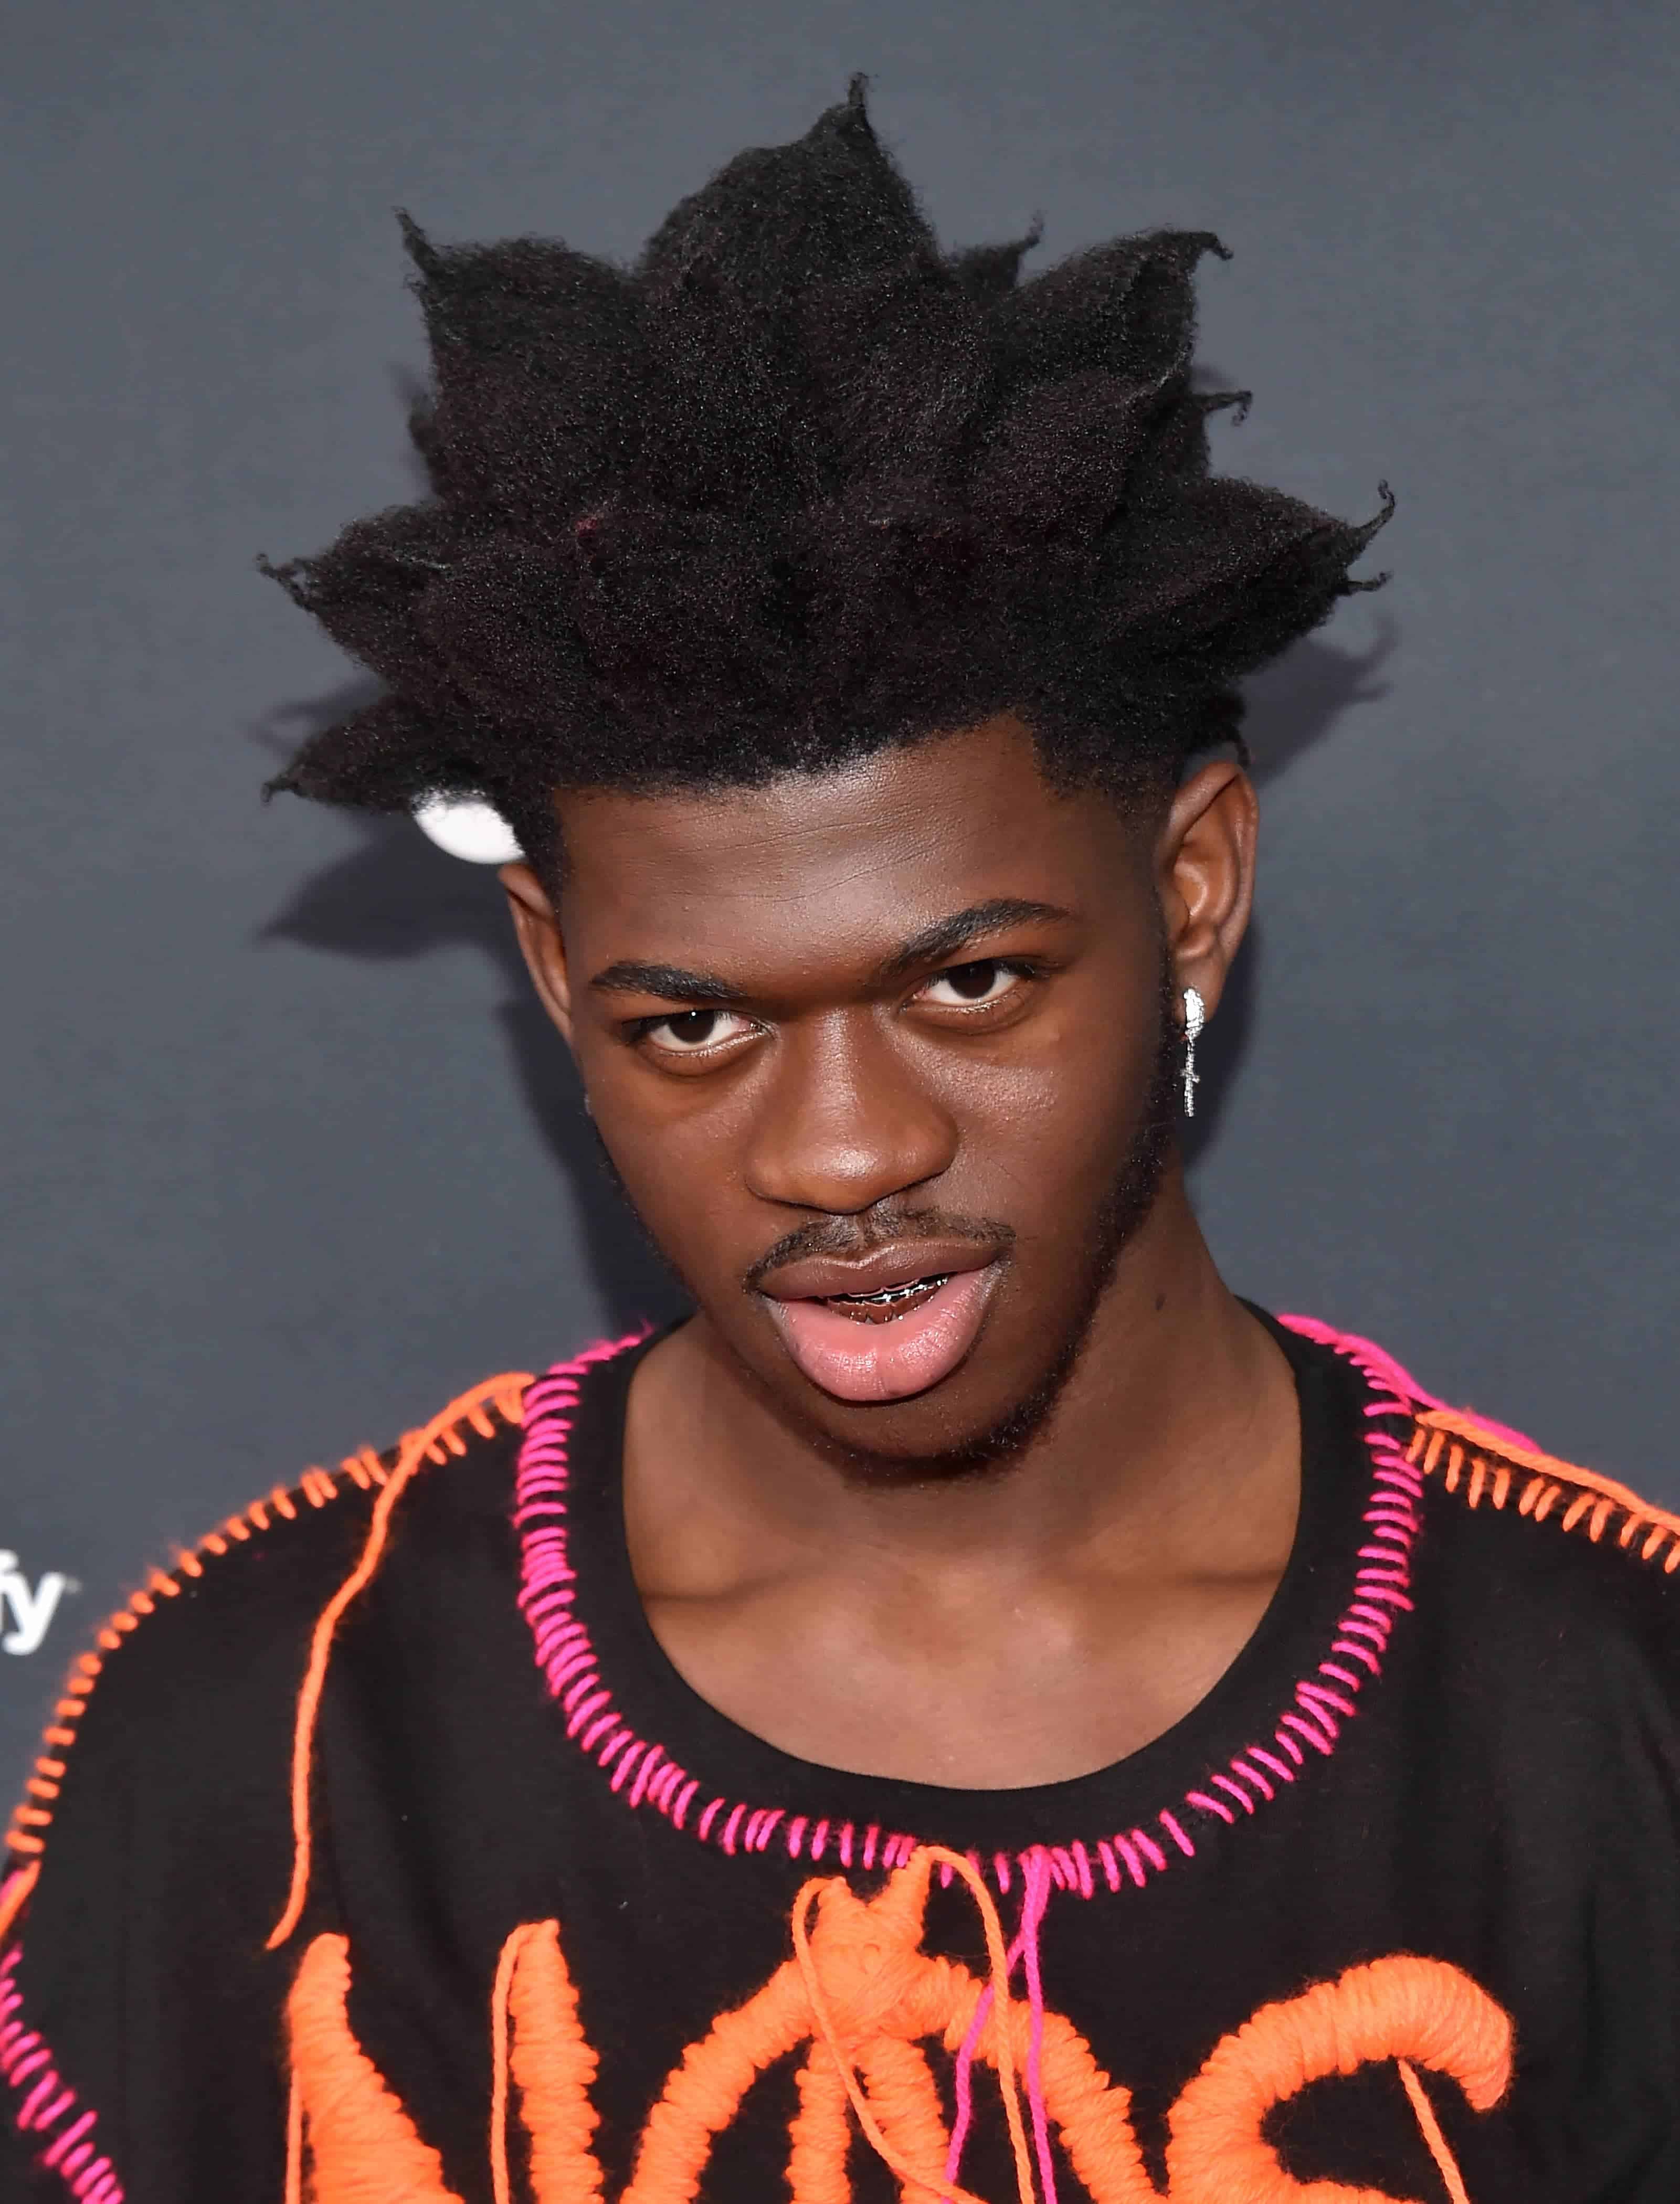 Lil Nas X's $1,018 'Satan Nikes' Sell Out in Less Than a Minute